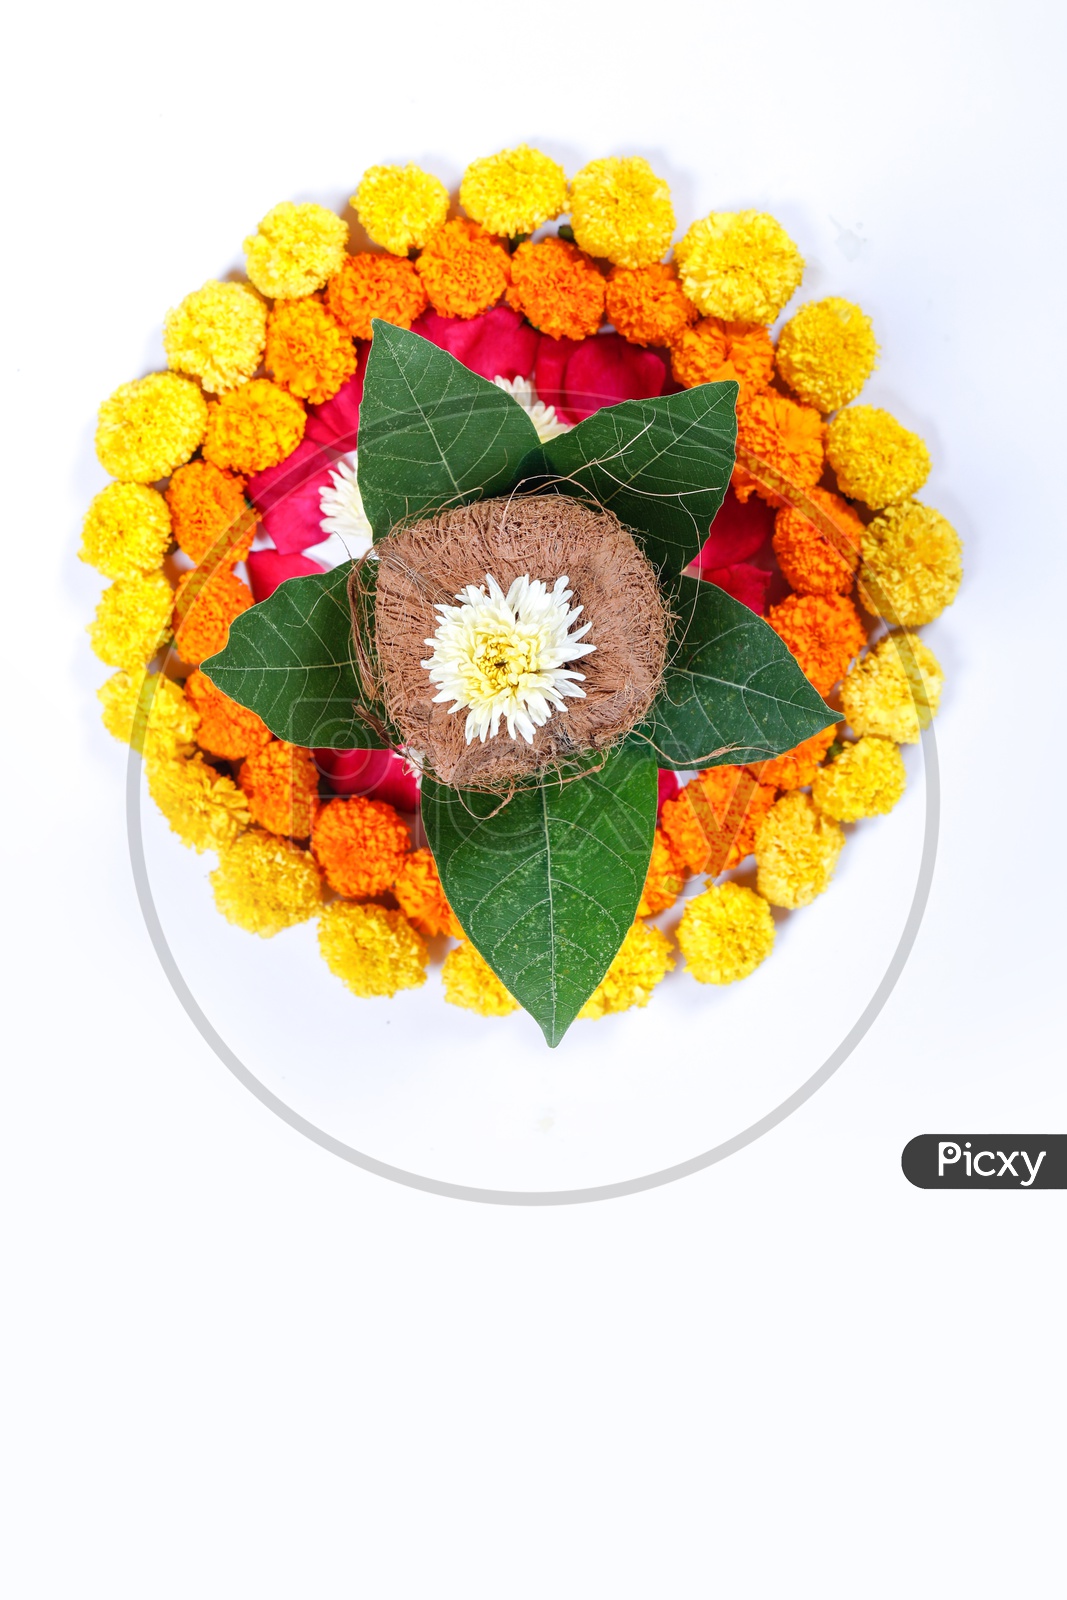 Kalisam decorated with Marigold Flower for Pooja. Indian traditions/rituals